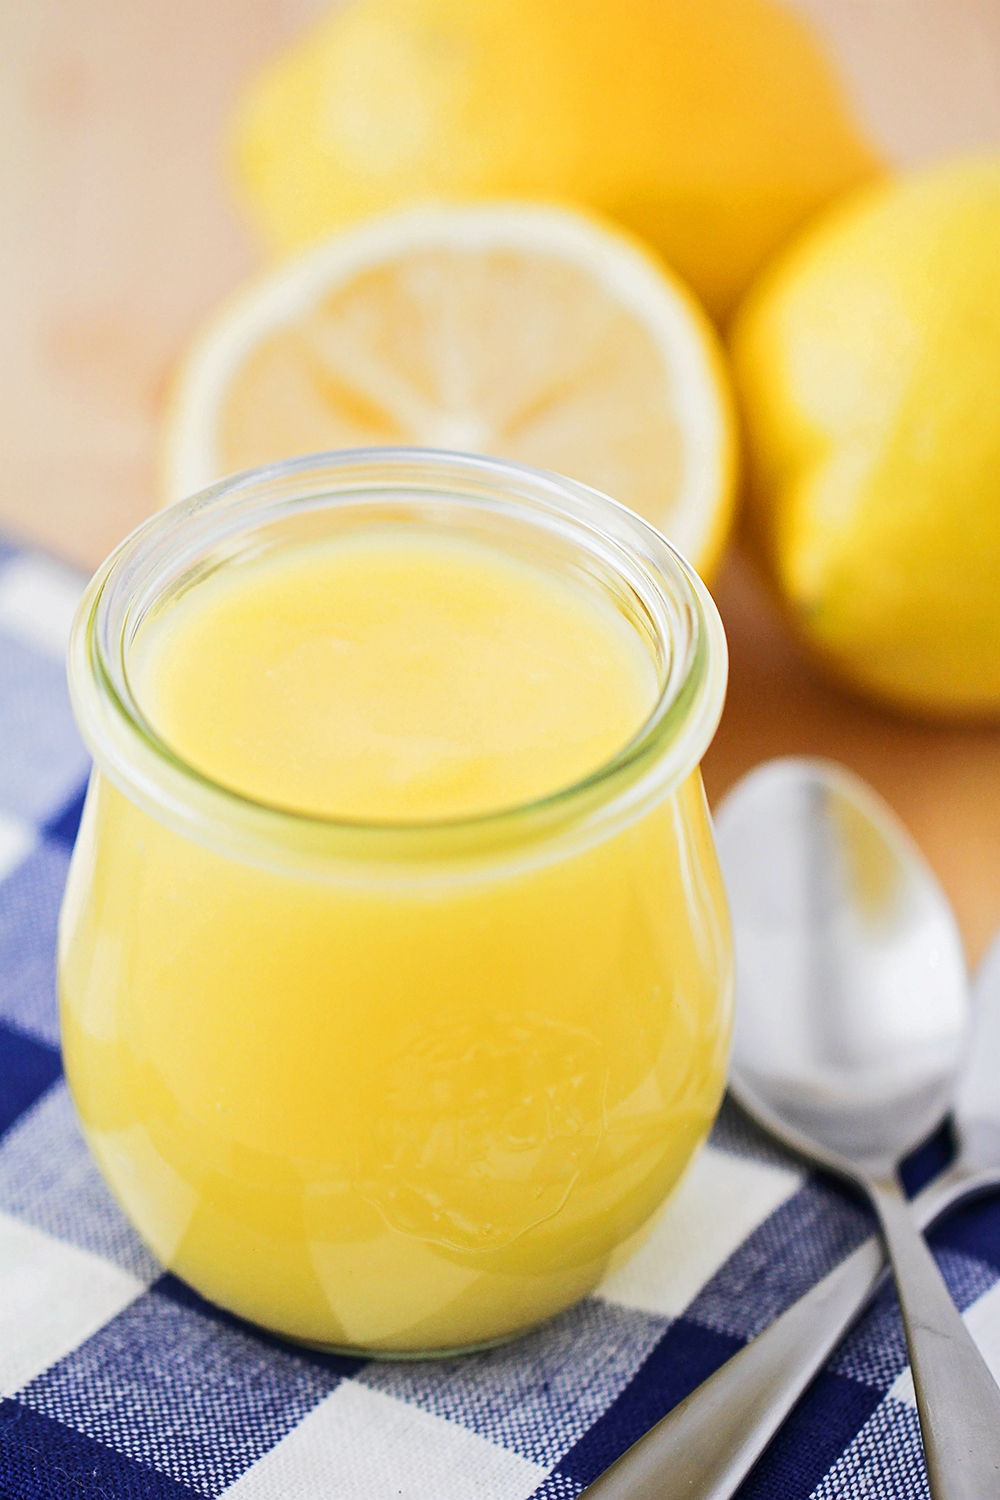 This homemade lemon curd has a bright, sunny flavor, and is the perfect balance of sweet and tart!